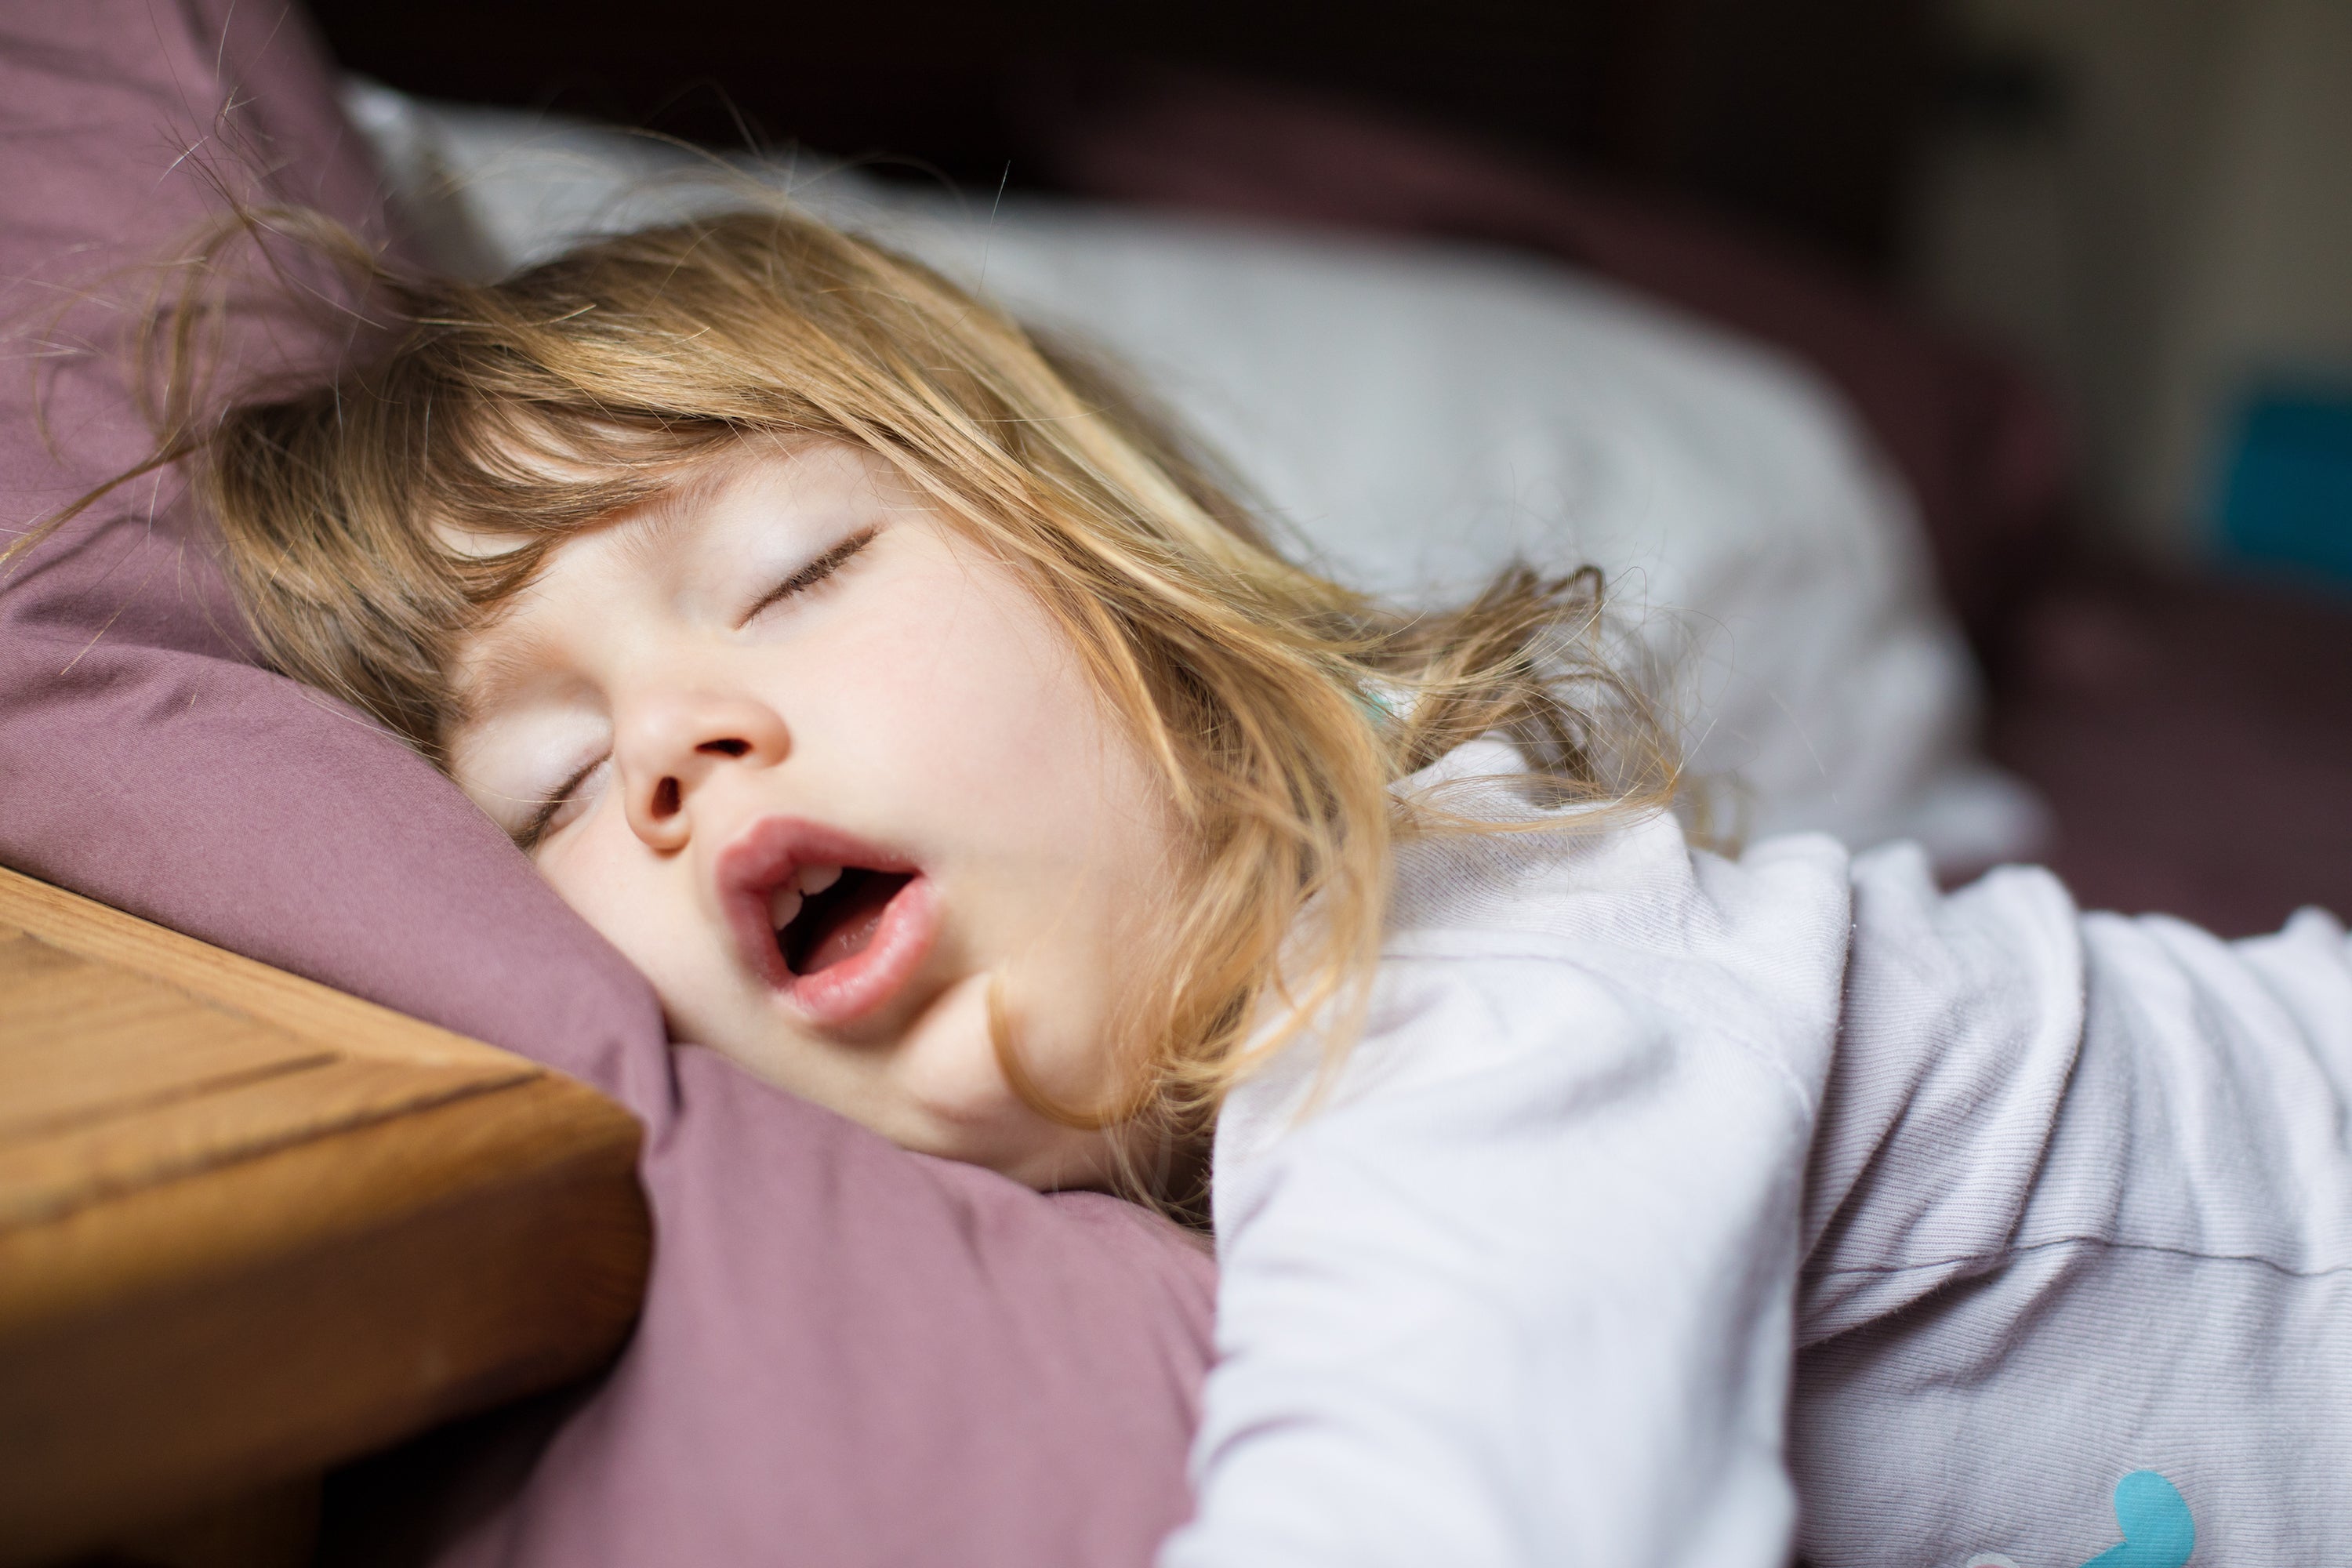 What To Do When Choking On Saliva While Sleeping